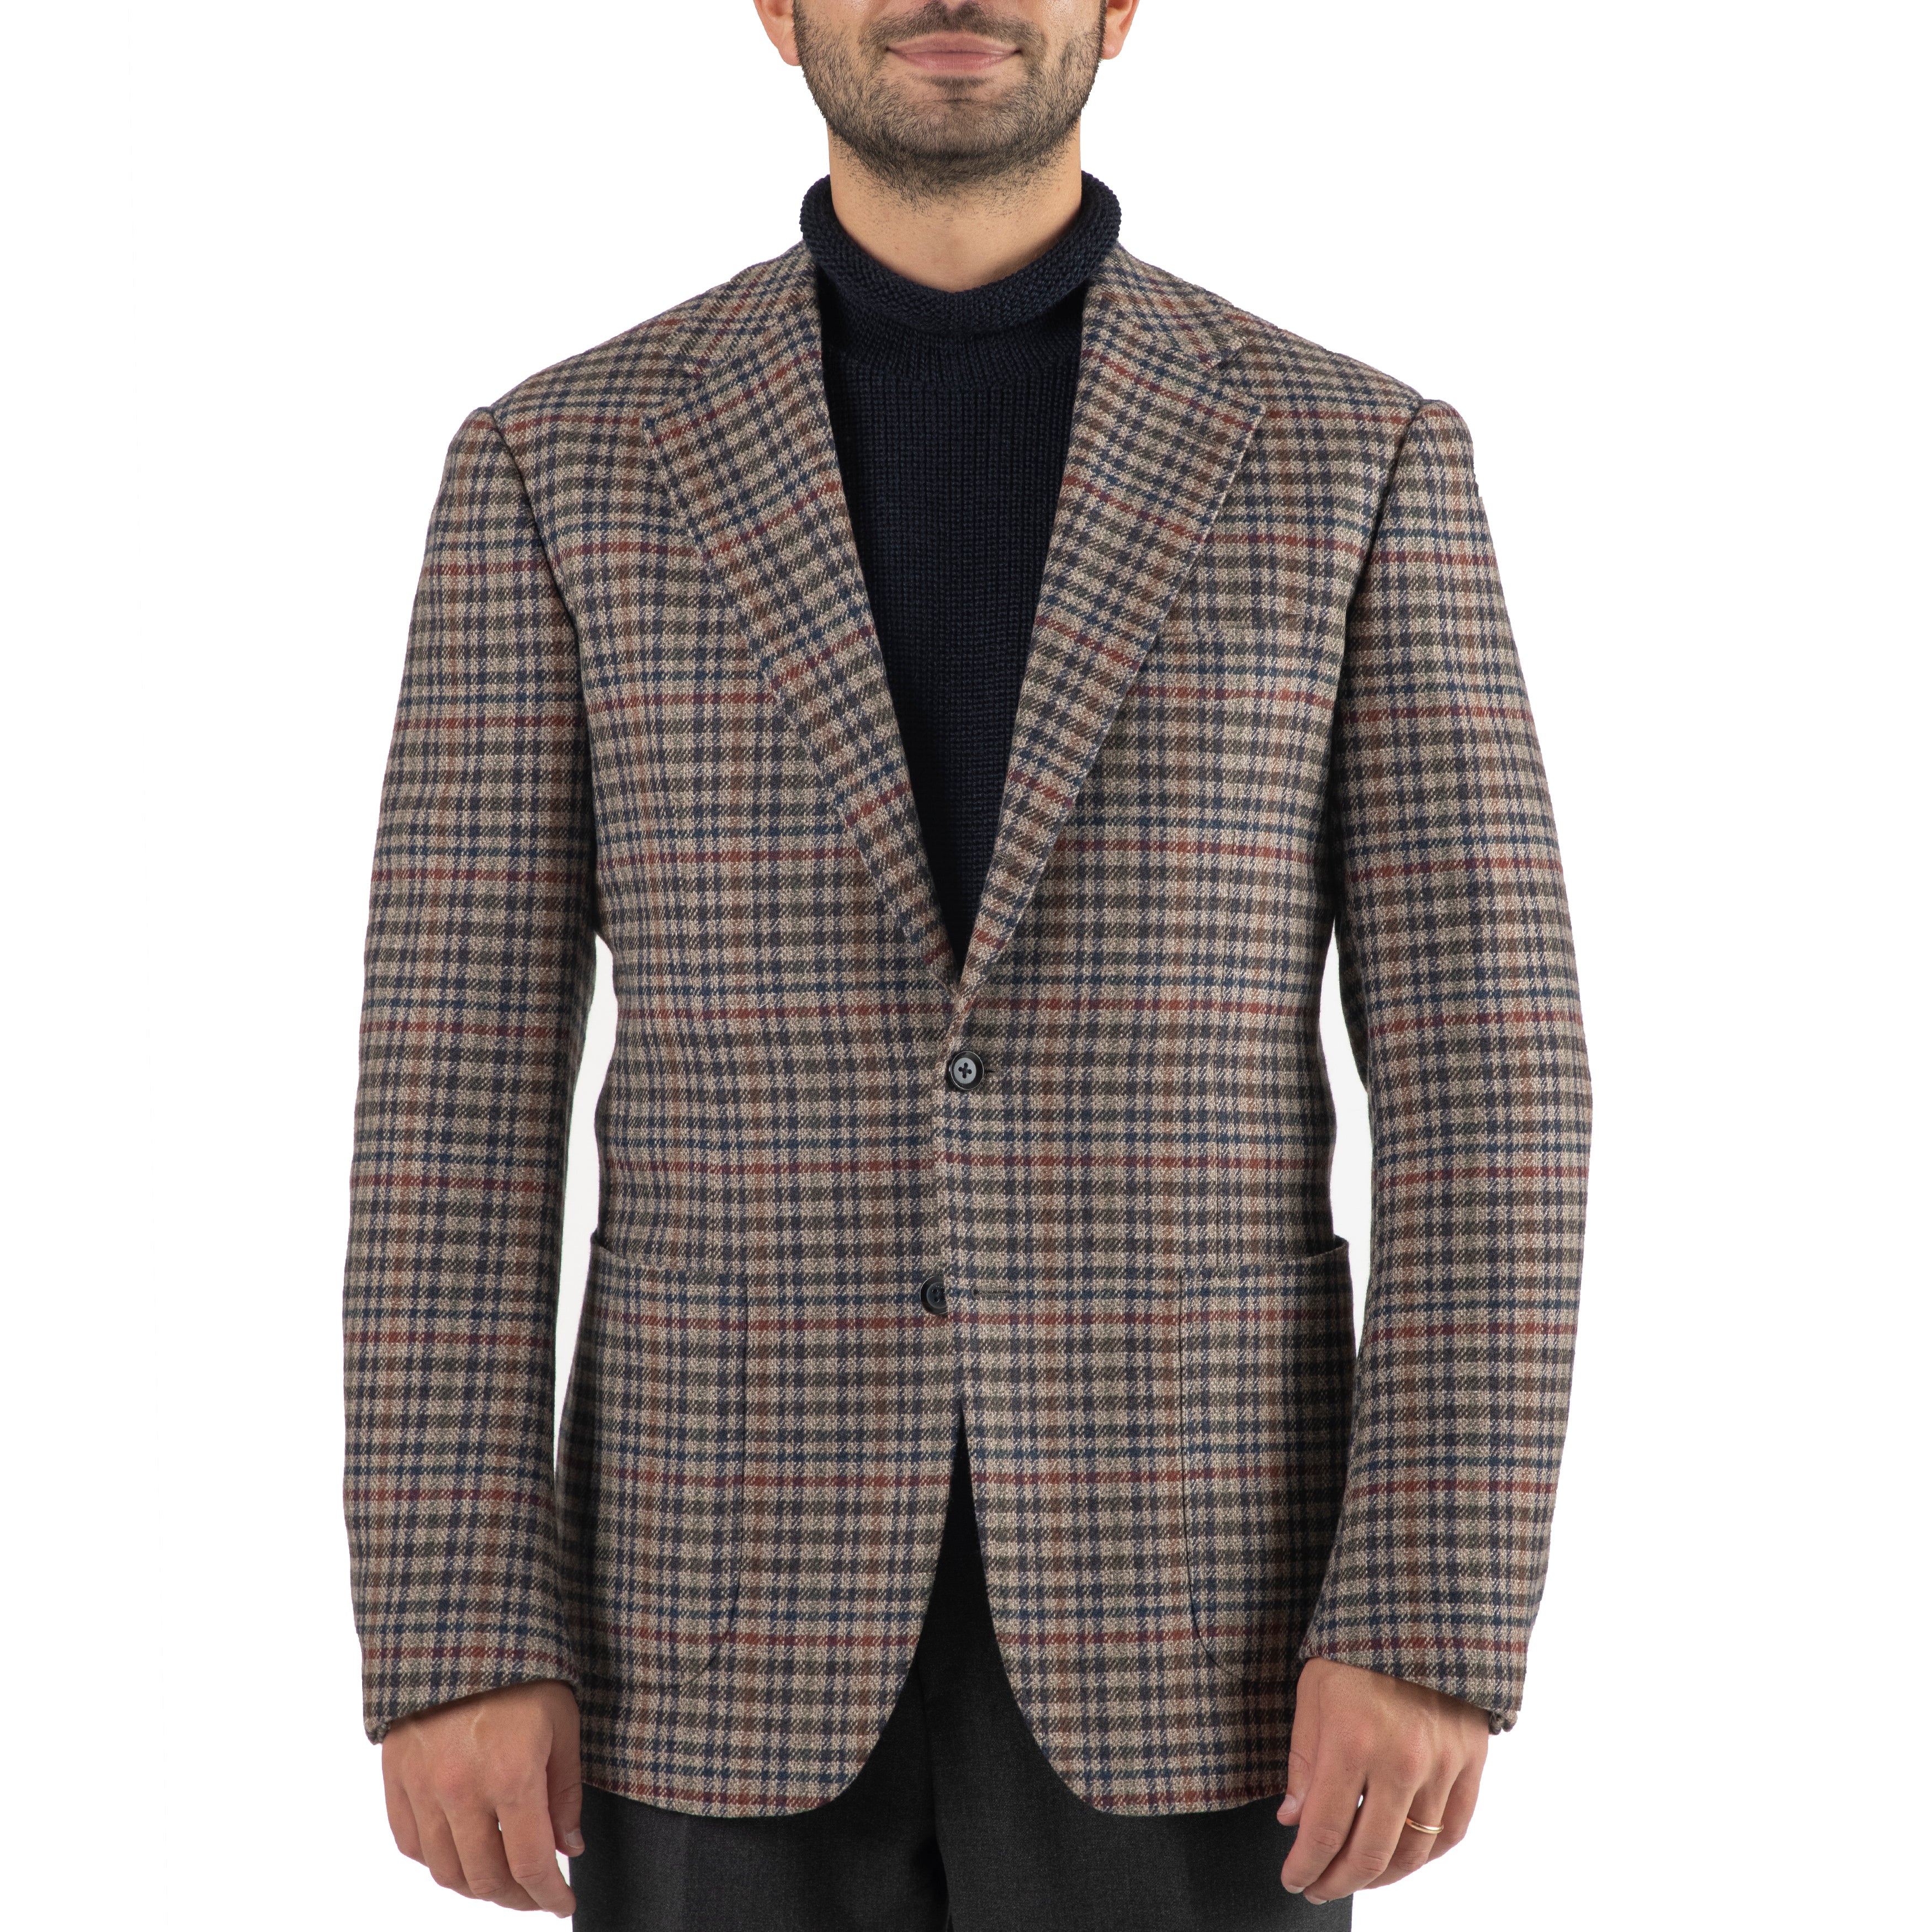 Wool/Cashmere Check Model 3 Sport Coat - The Armoury